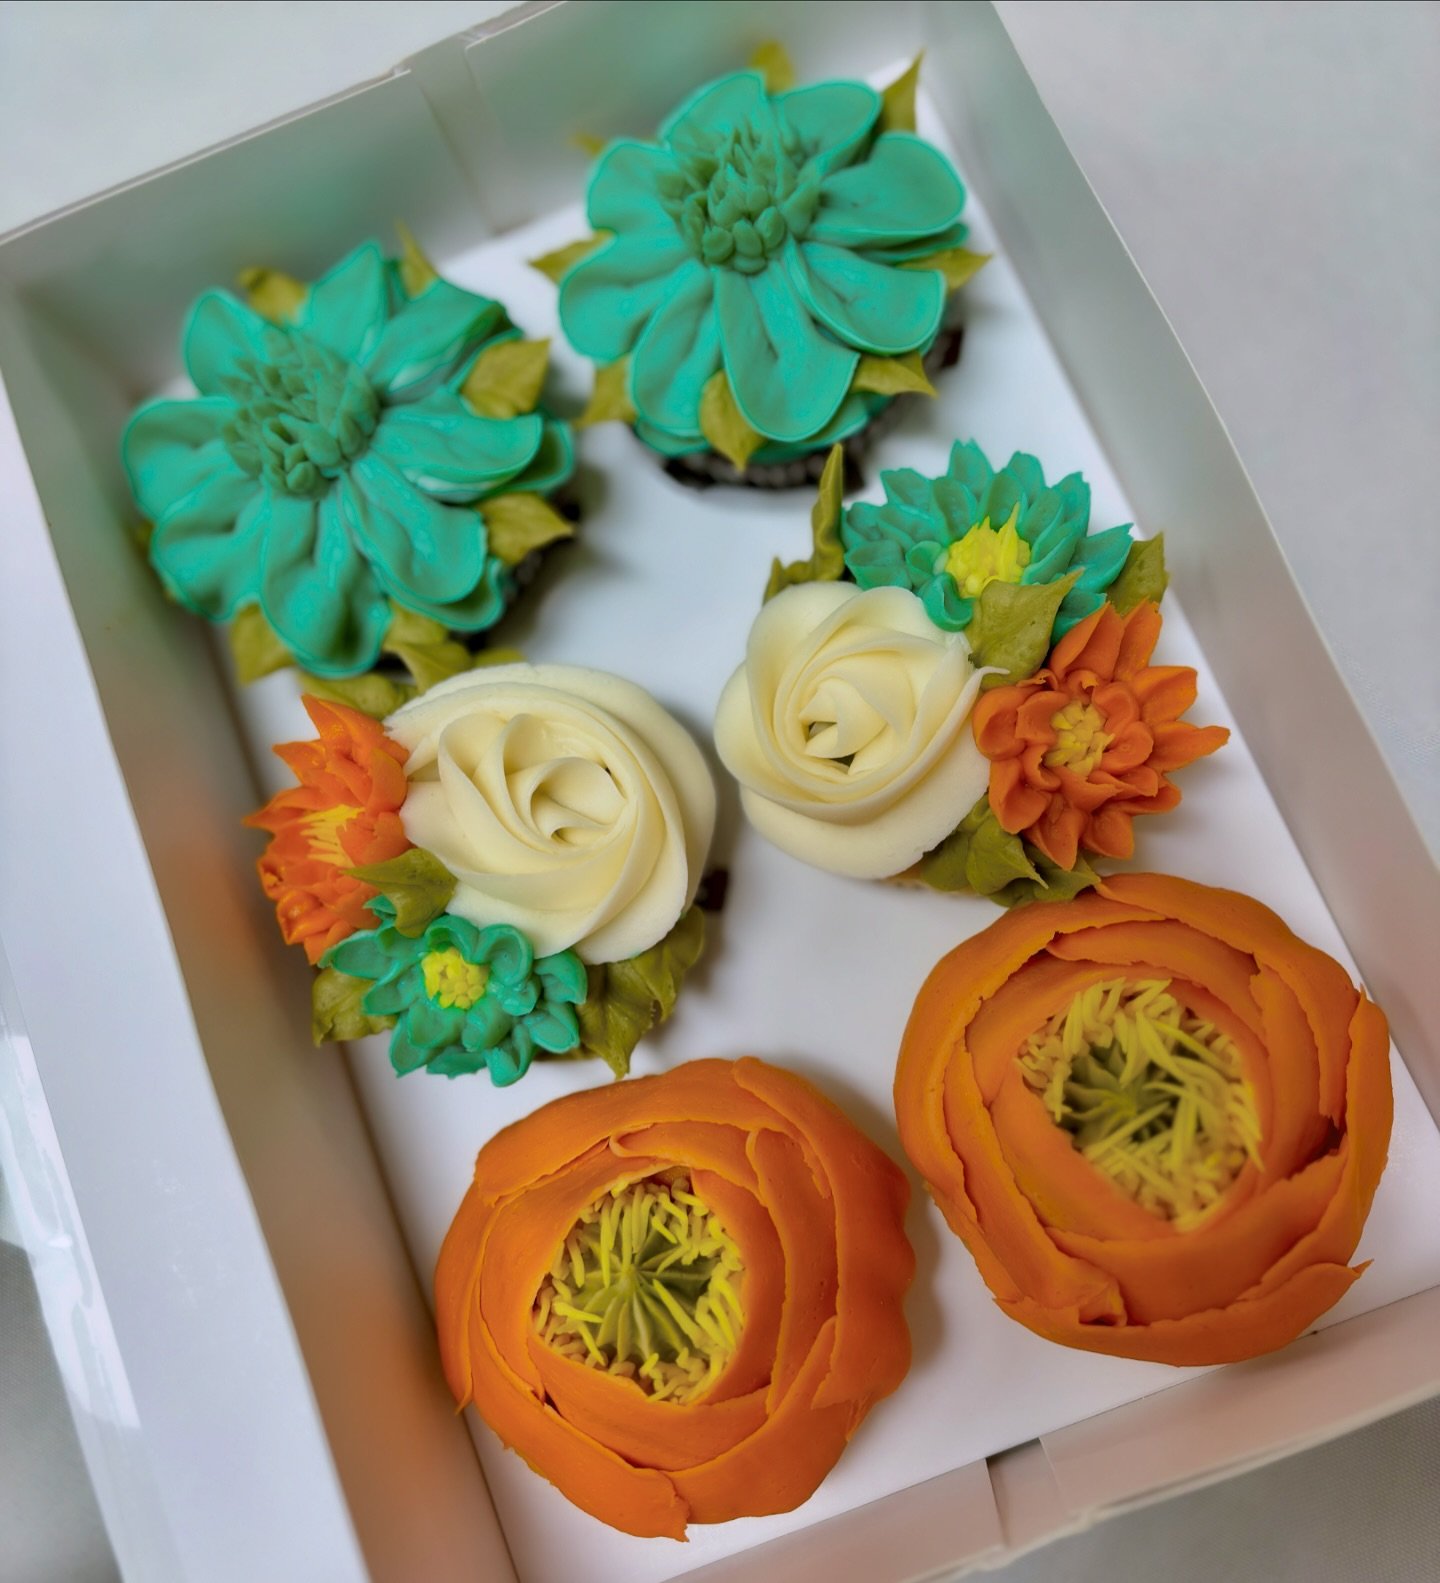 These COLORS!!!!!!!! 😍😍 #buttercreamflowers #floralcupcakes #edibleart